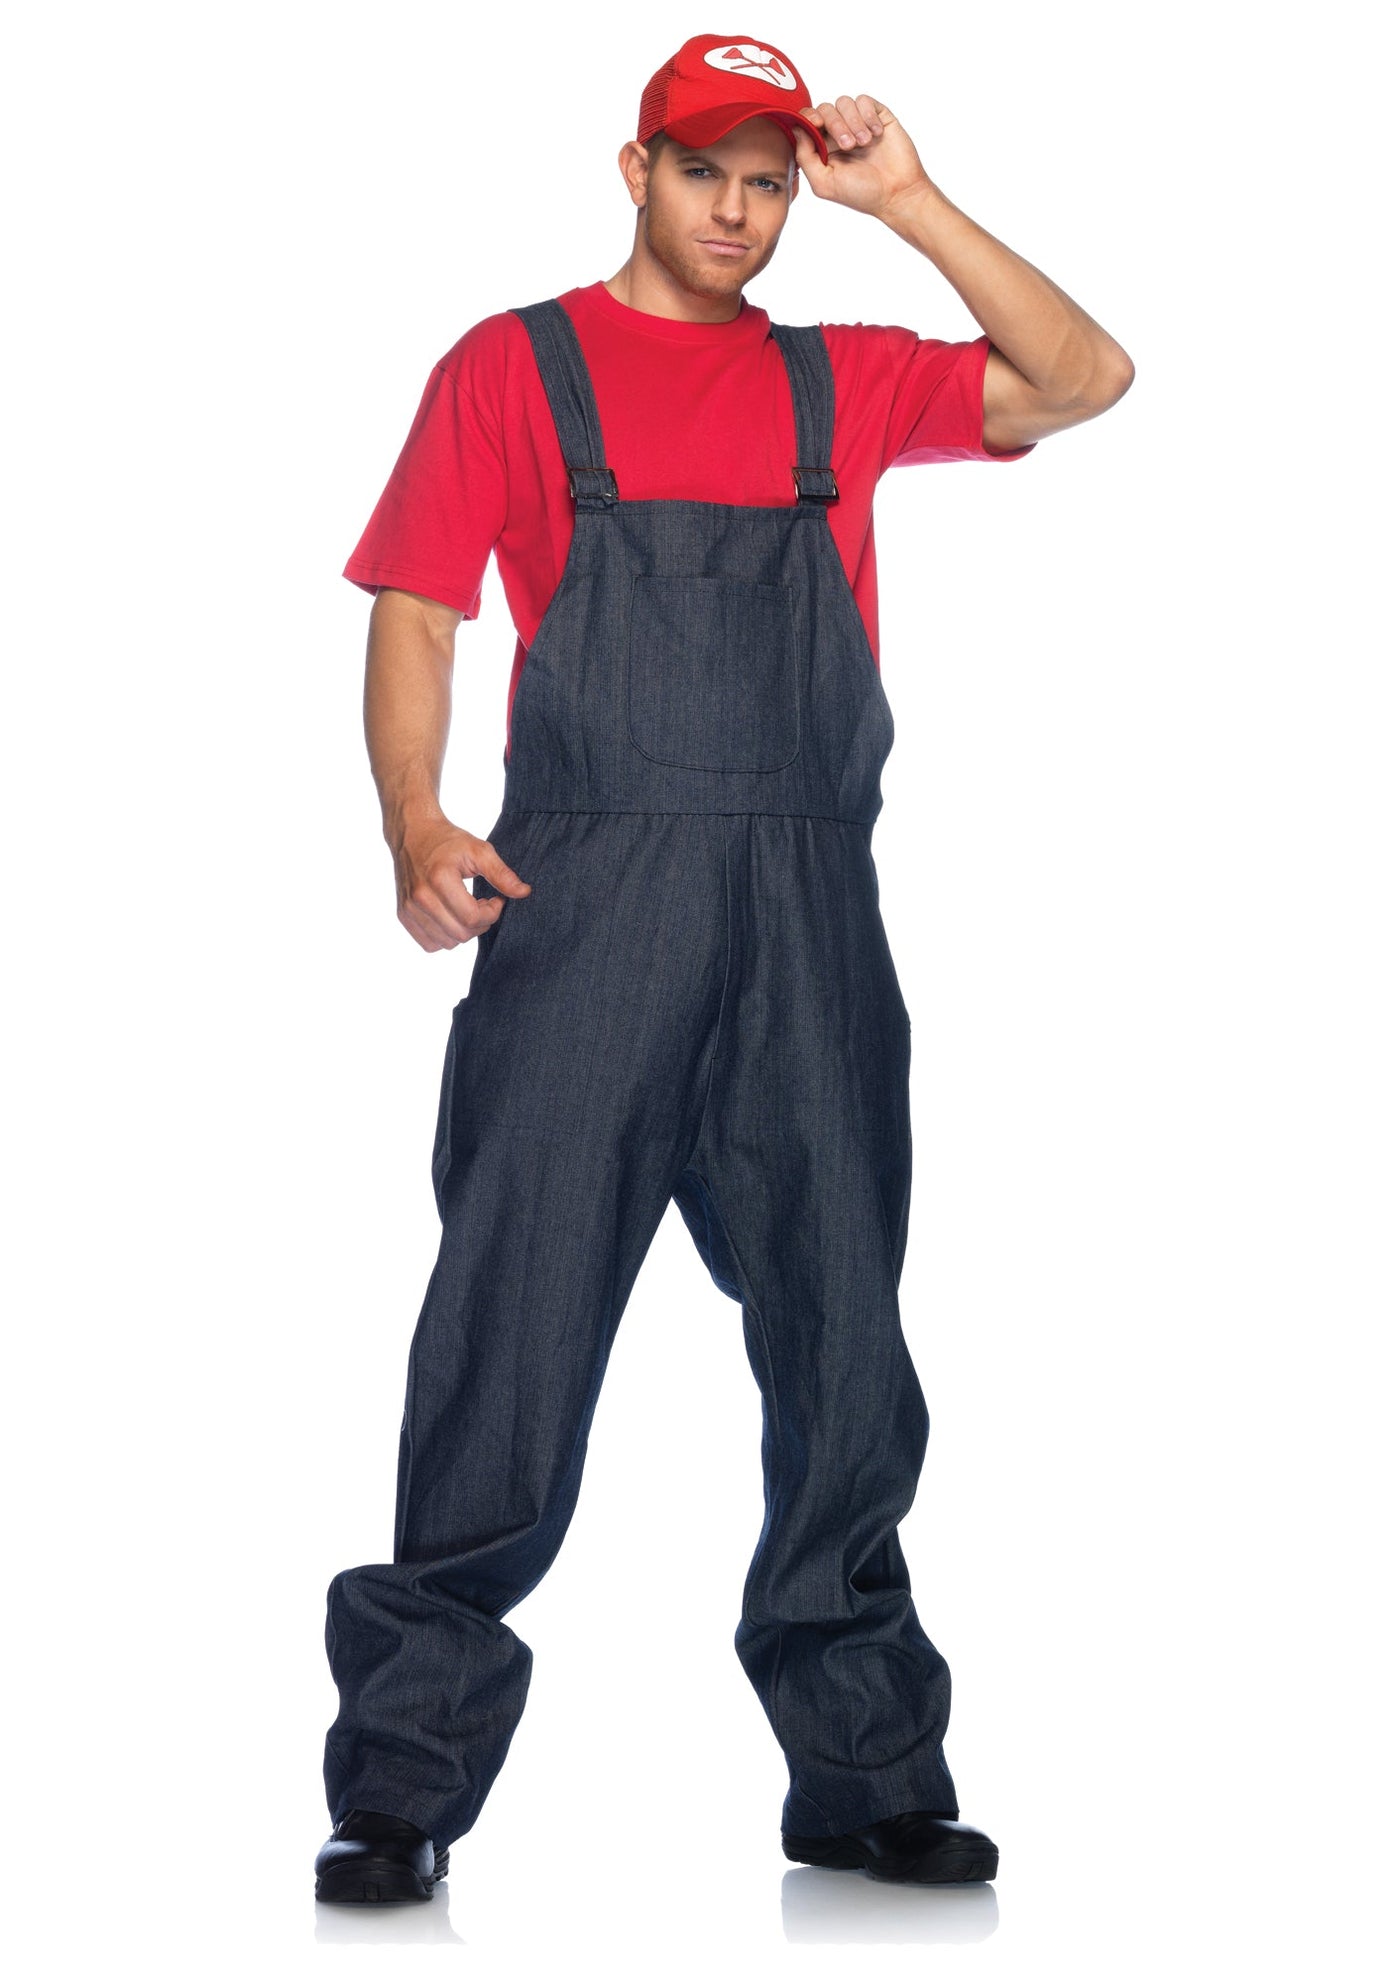 Super Plumber Costume - JJ's Party House